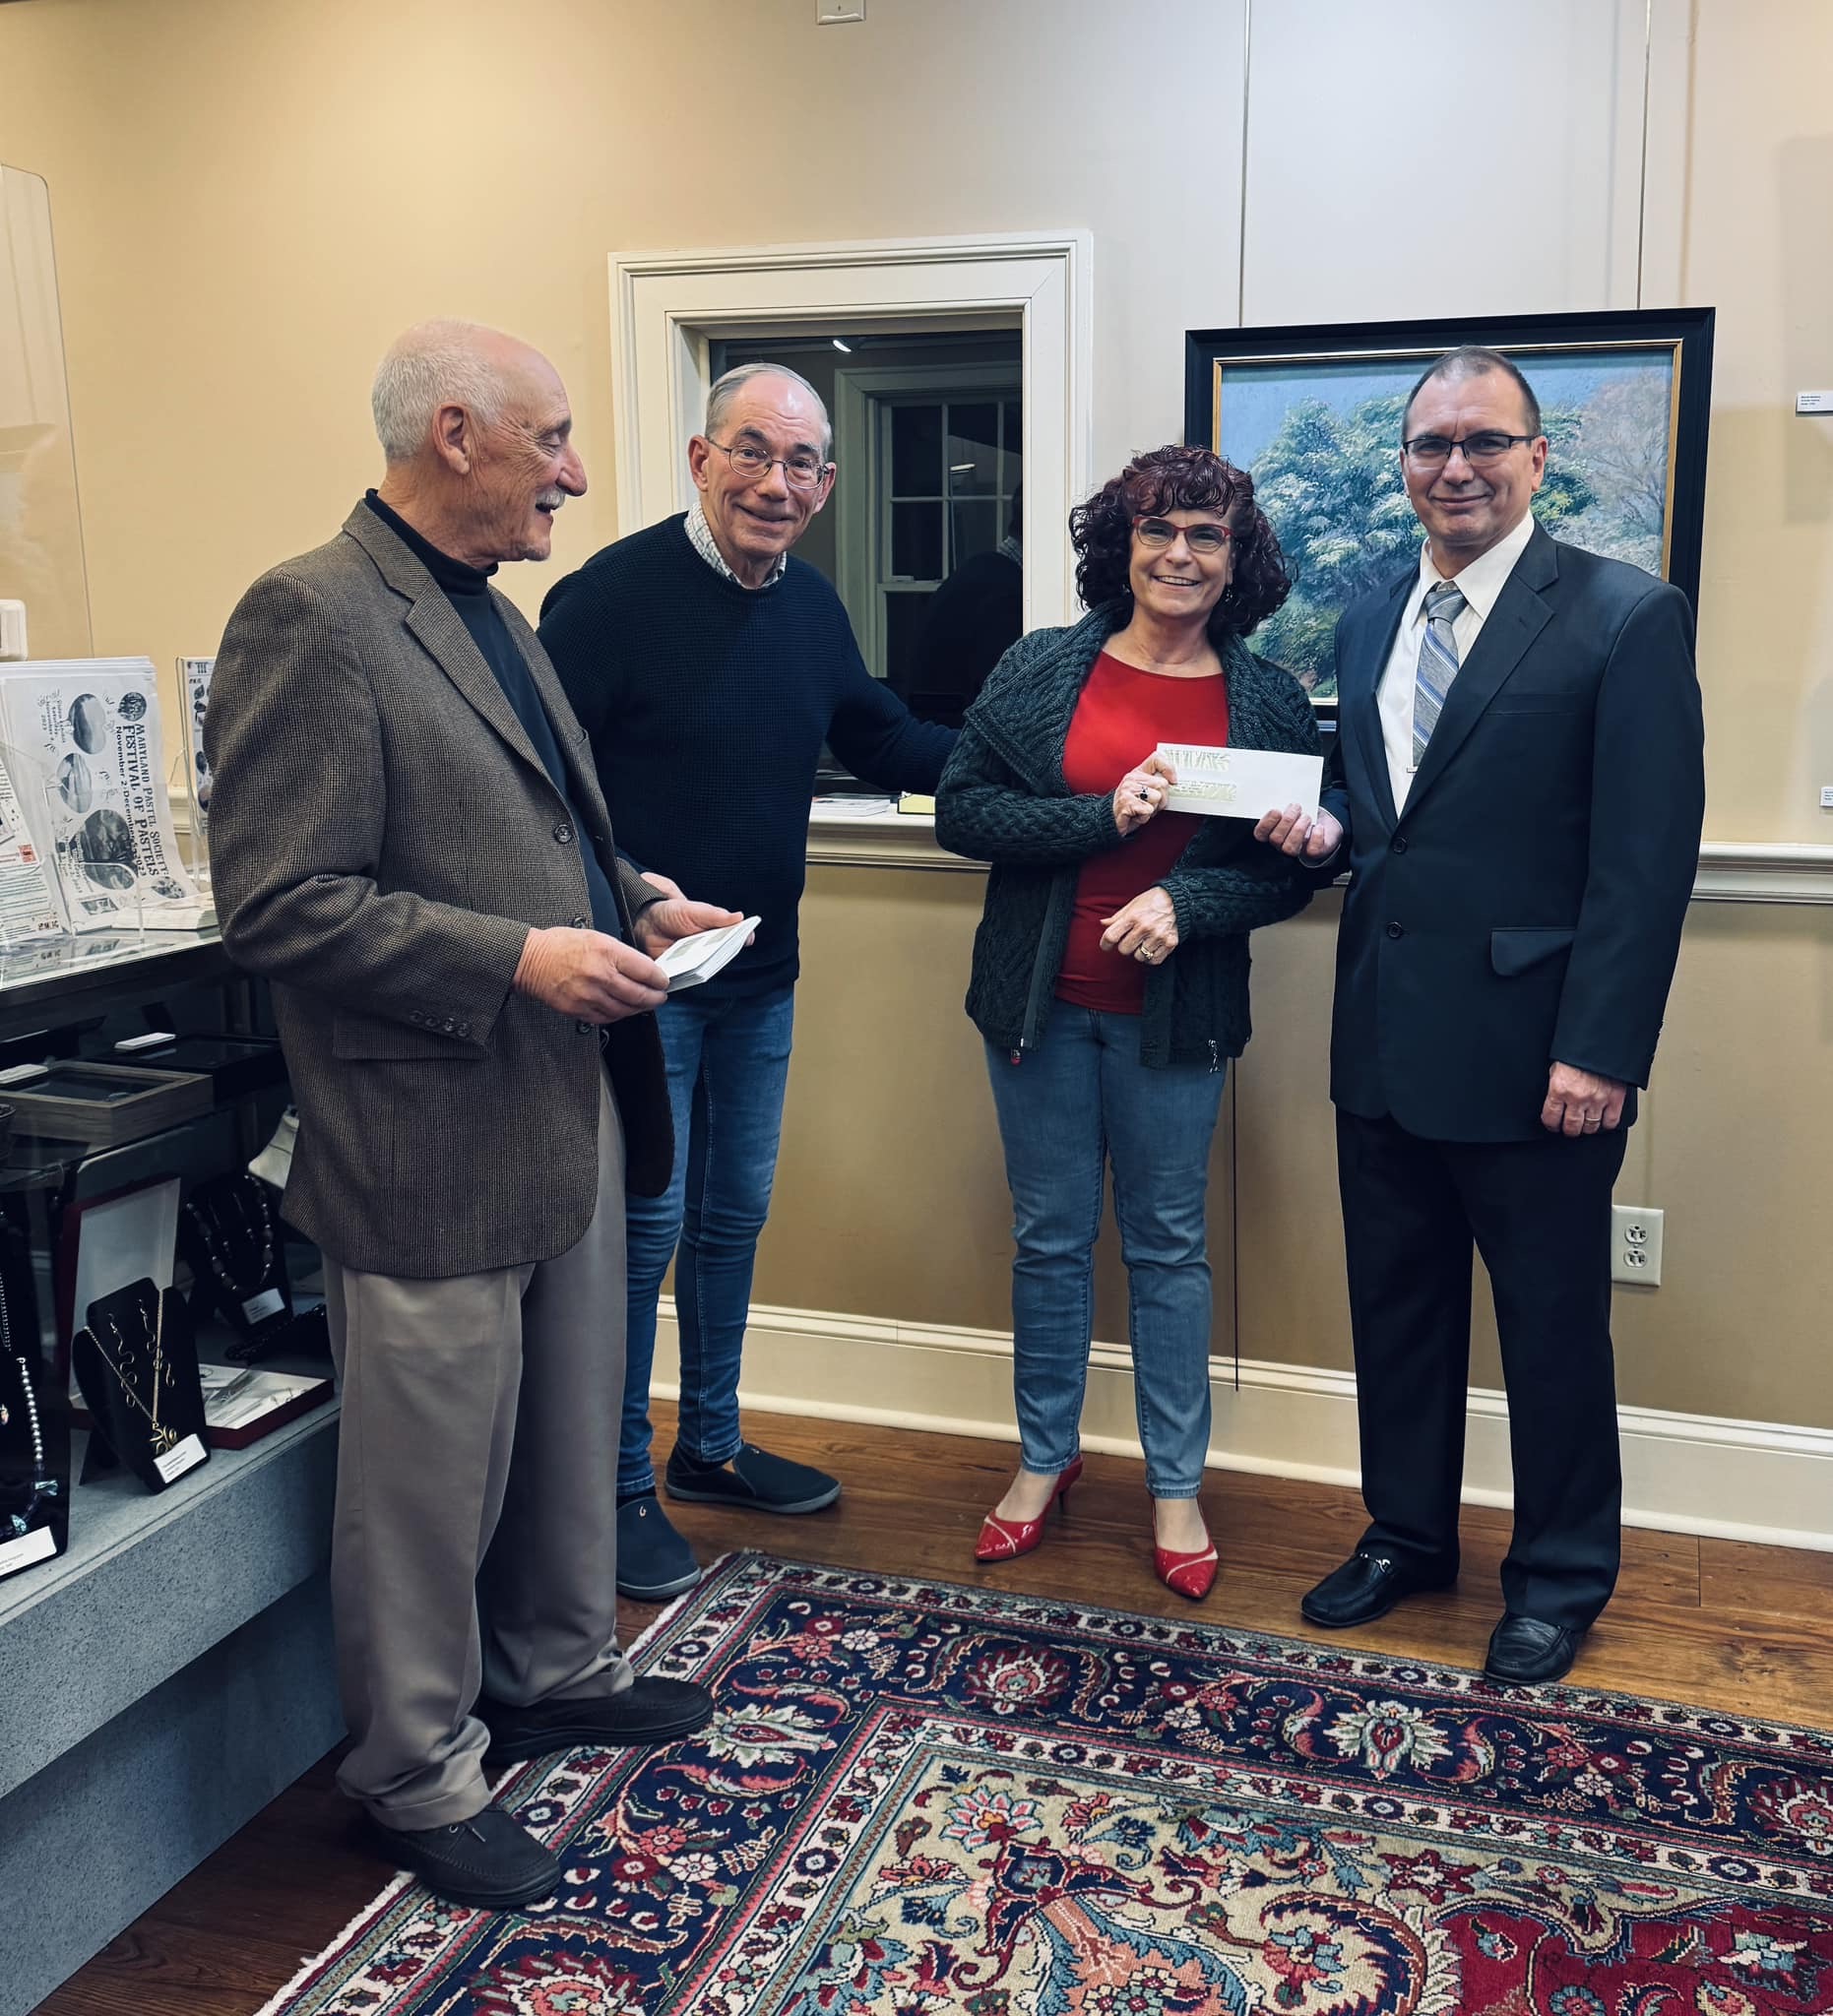 Receiving a grant from the Washington County arts Council